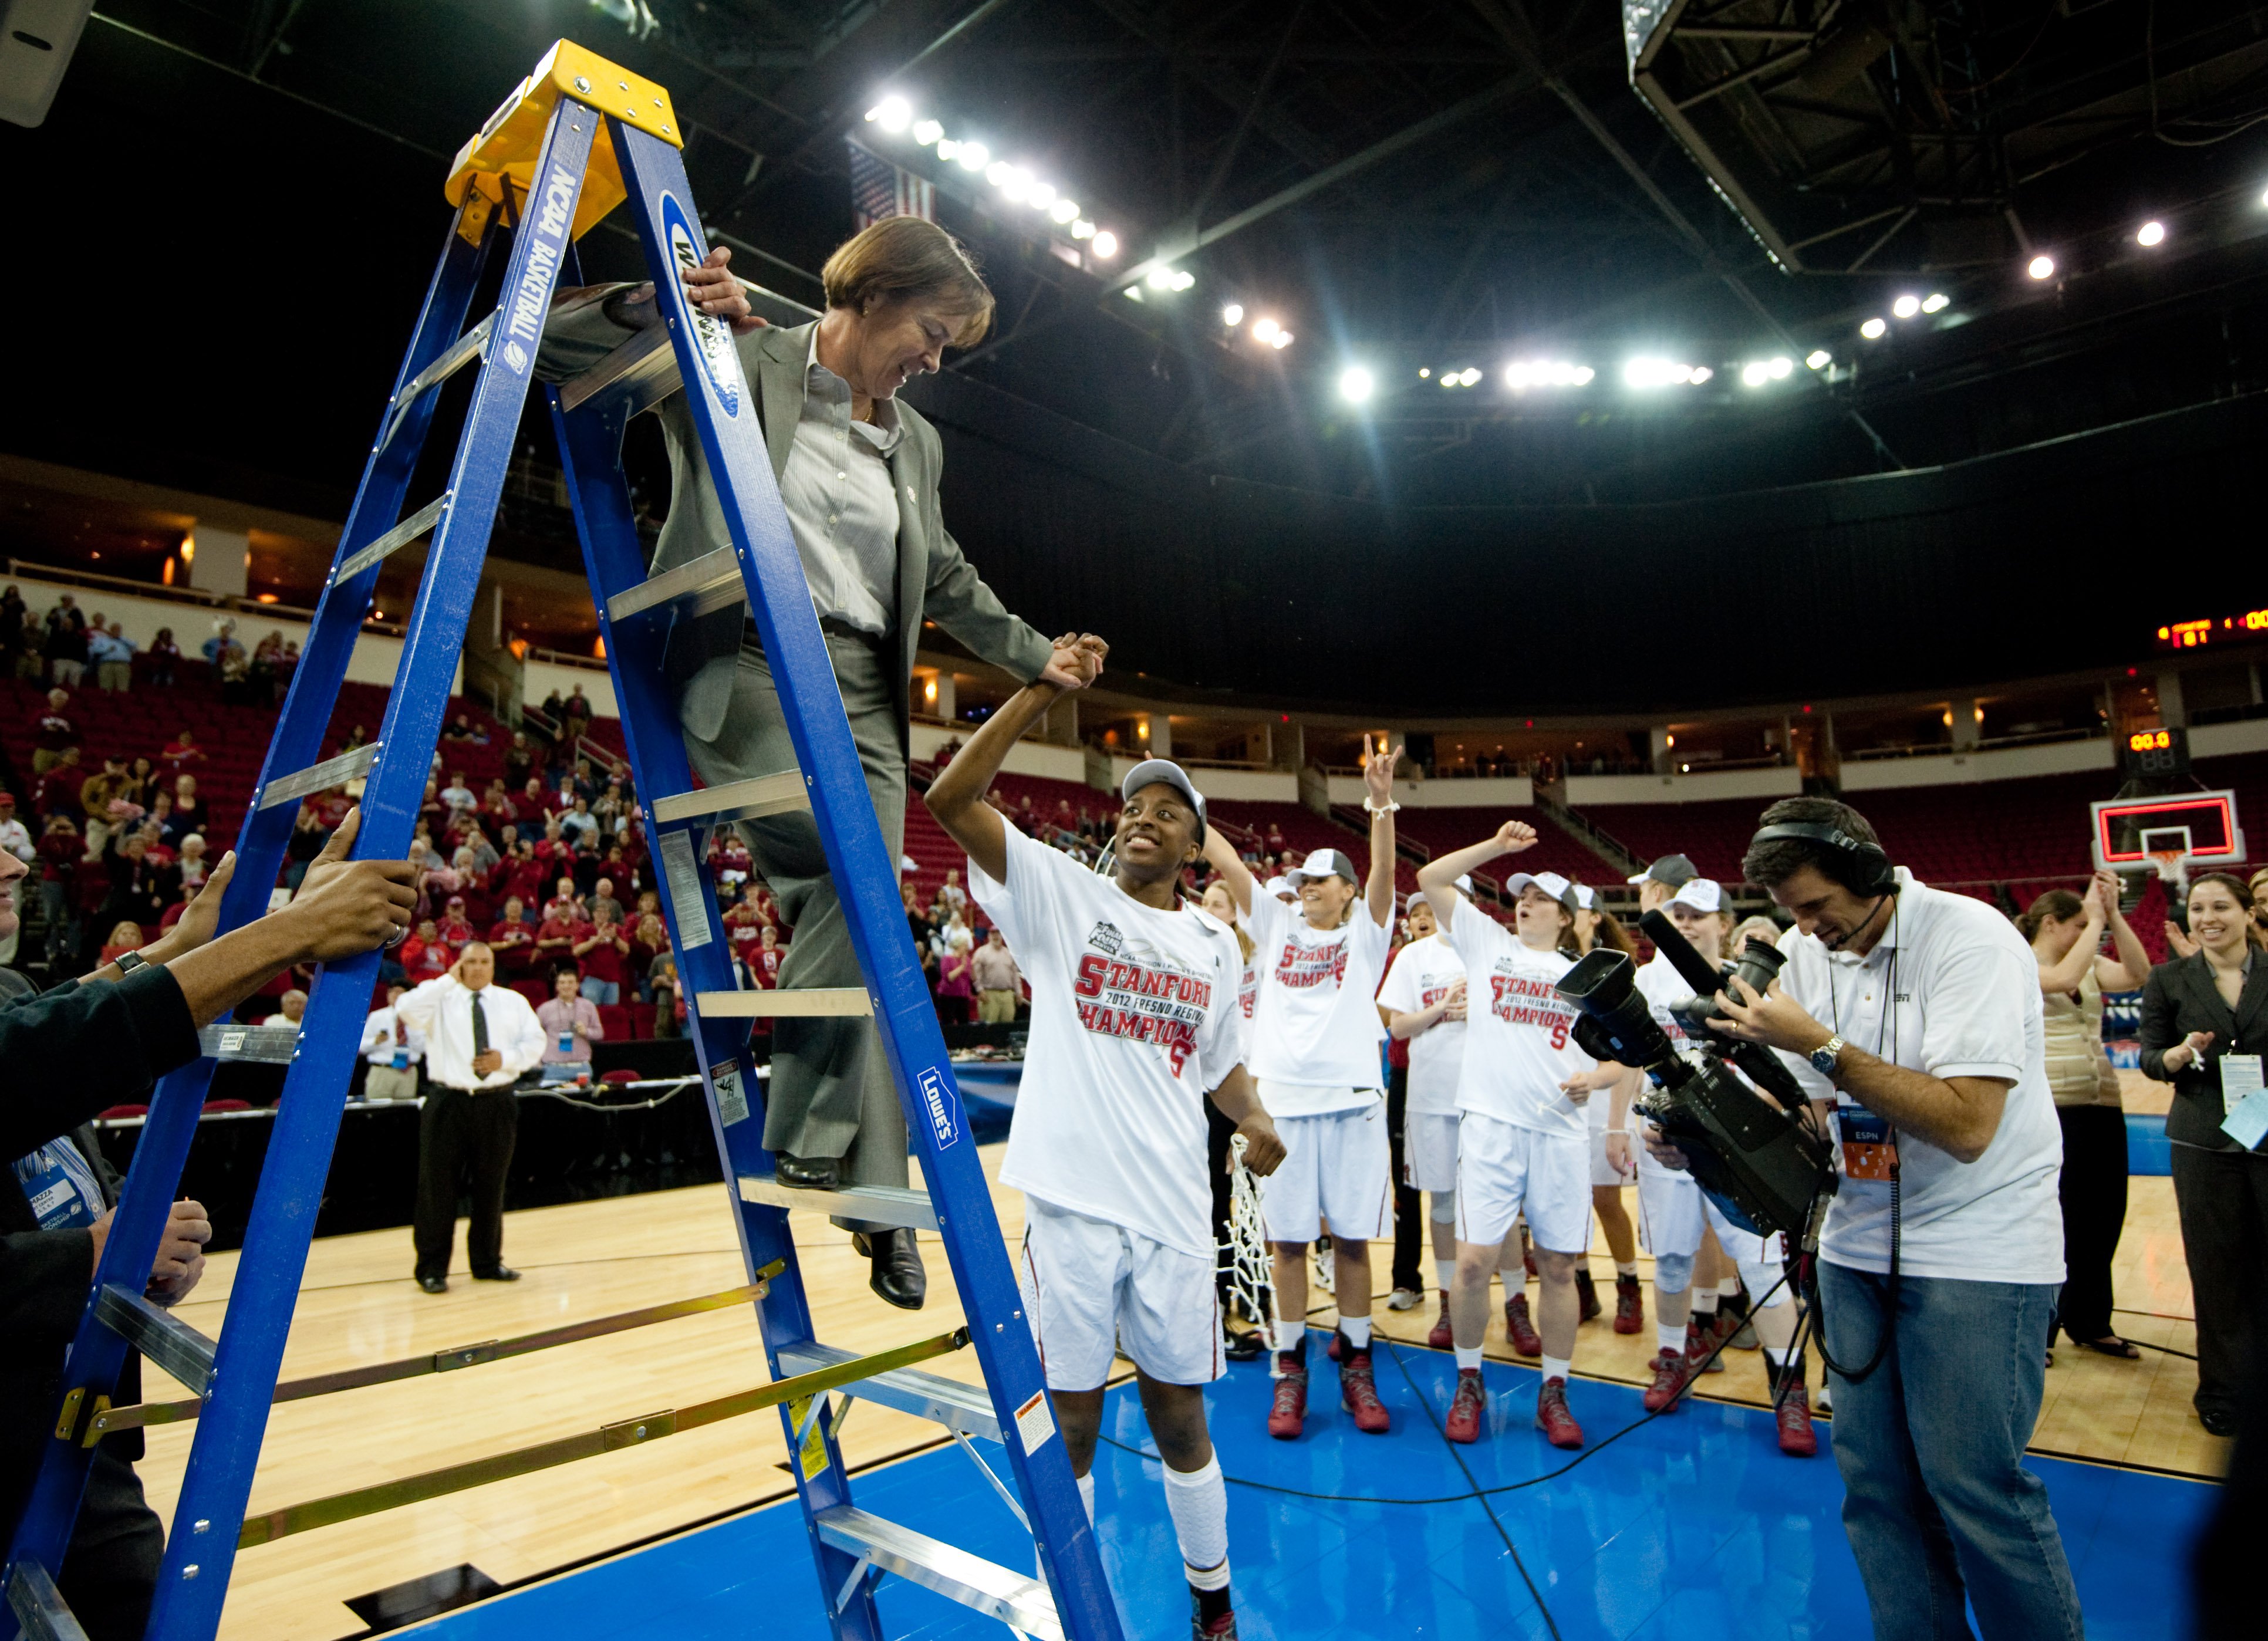 VanDerveer is helped down the ladder after giving senior Nneka Ogwumike the net after a 81-69 win over Duke at the Save Mart Center in Fresno for the West Regionals Championship of the 2012 NCAA Championships.